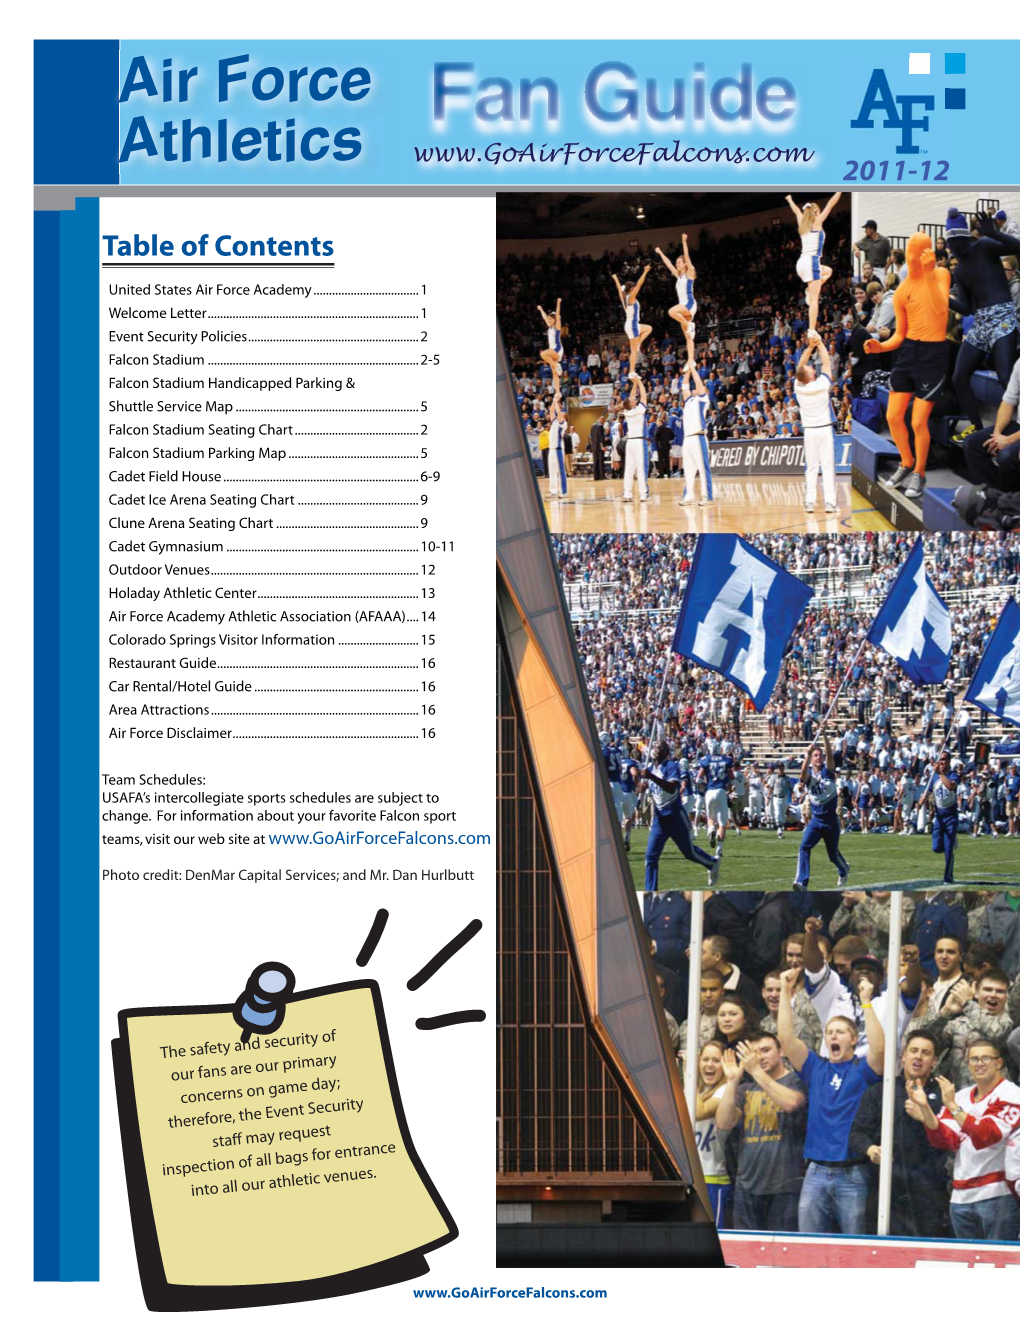 2011 Fan Guide Pages.Indd